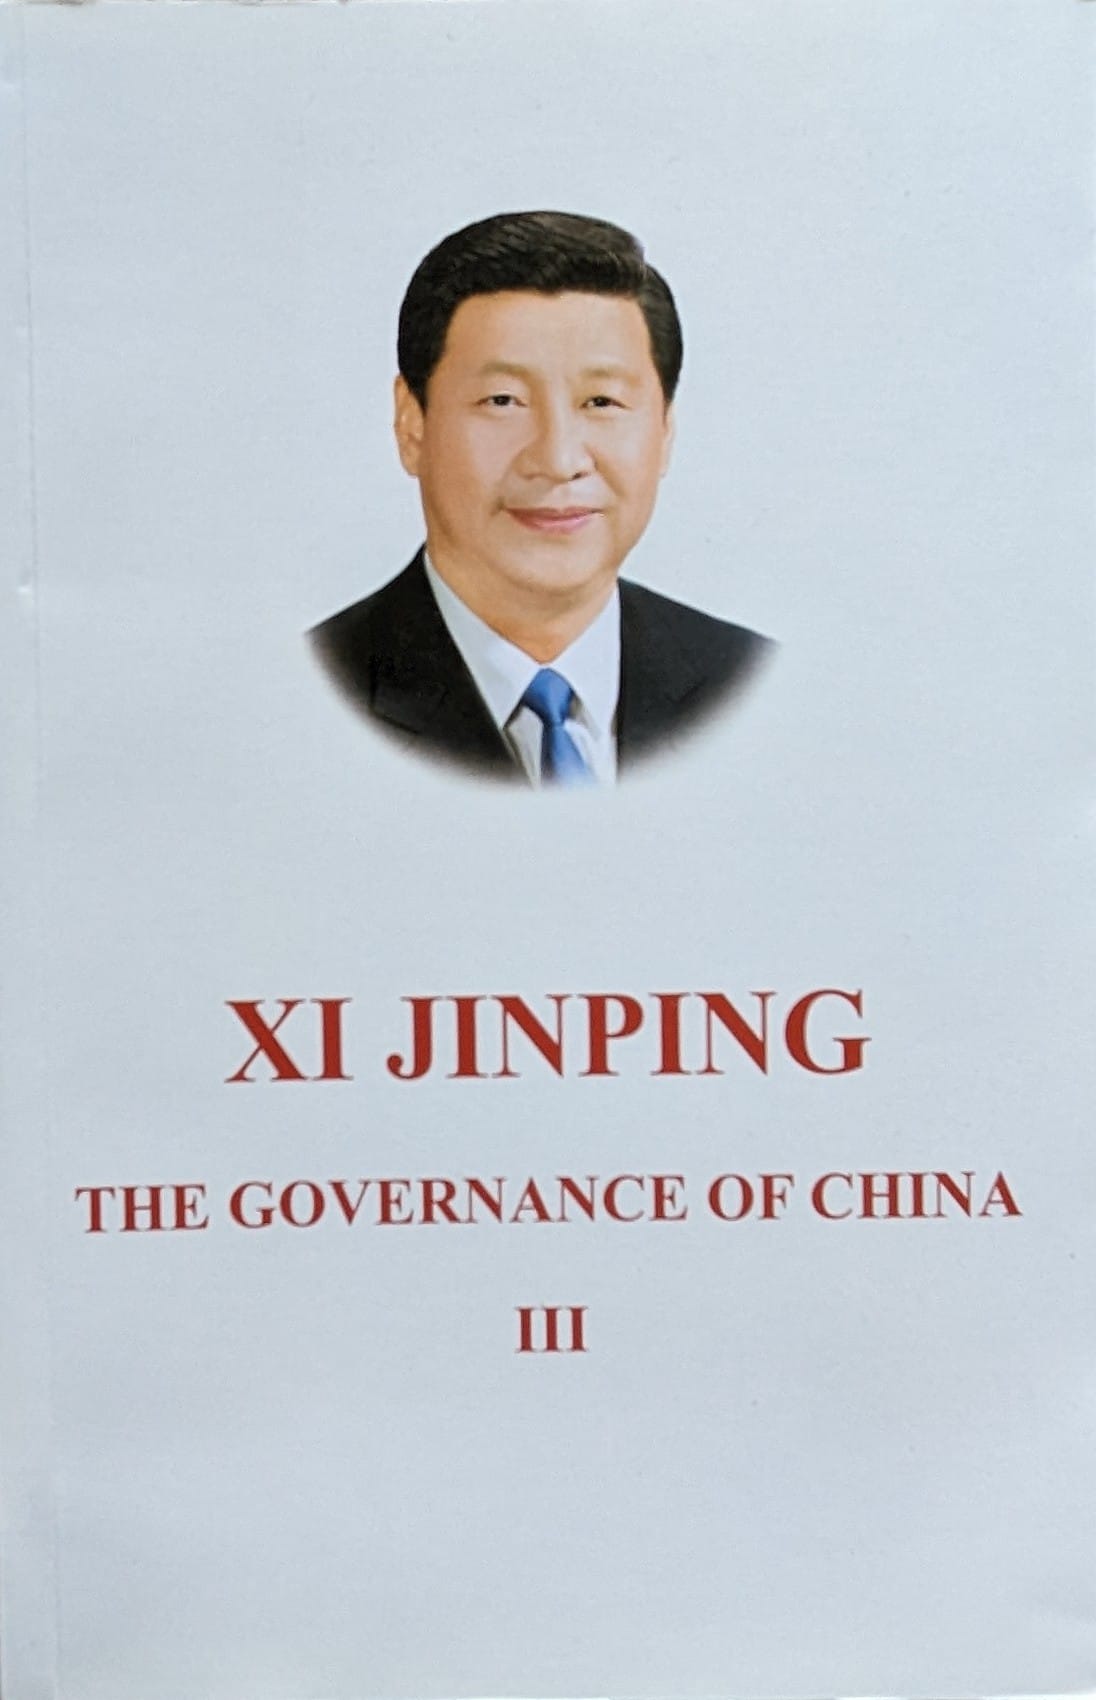 xi jinping the governance of china iii                                                               colectiv                                                                                            